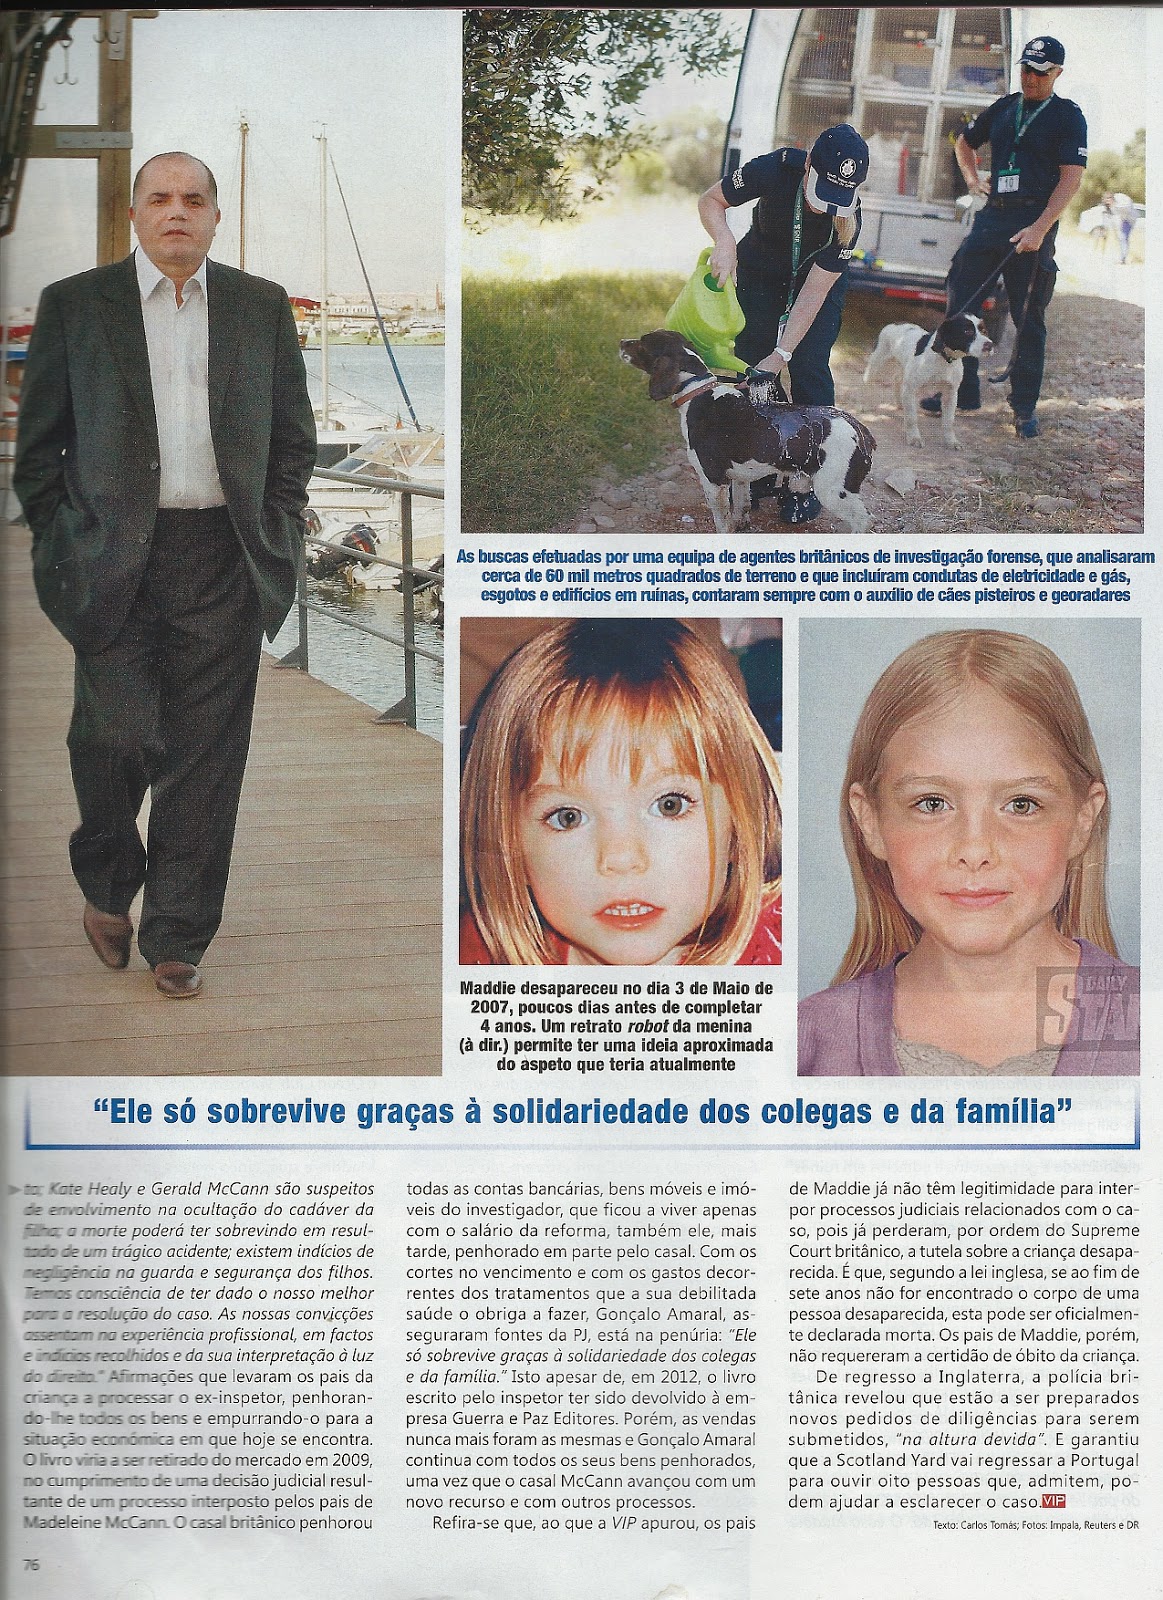 VIP magazine, nº 883, weekly edition from 17 to 23.06.2014, pages 74 to 76, paper edition